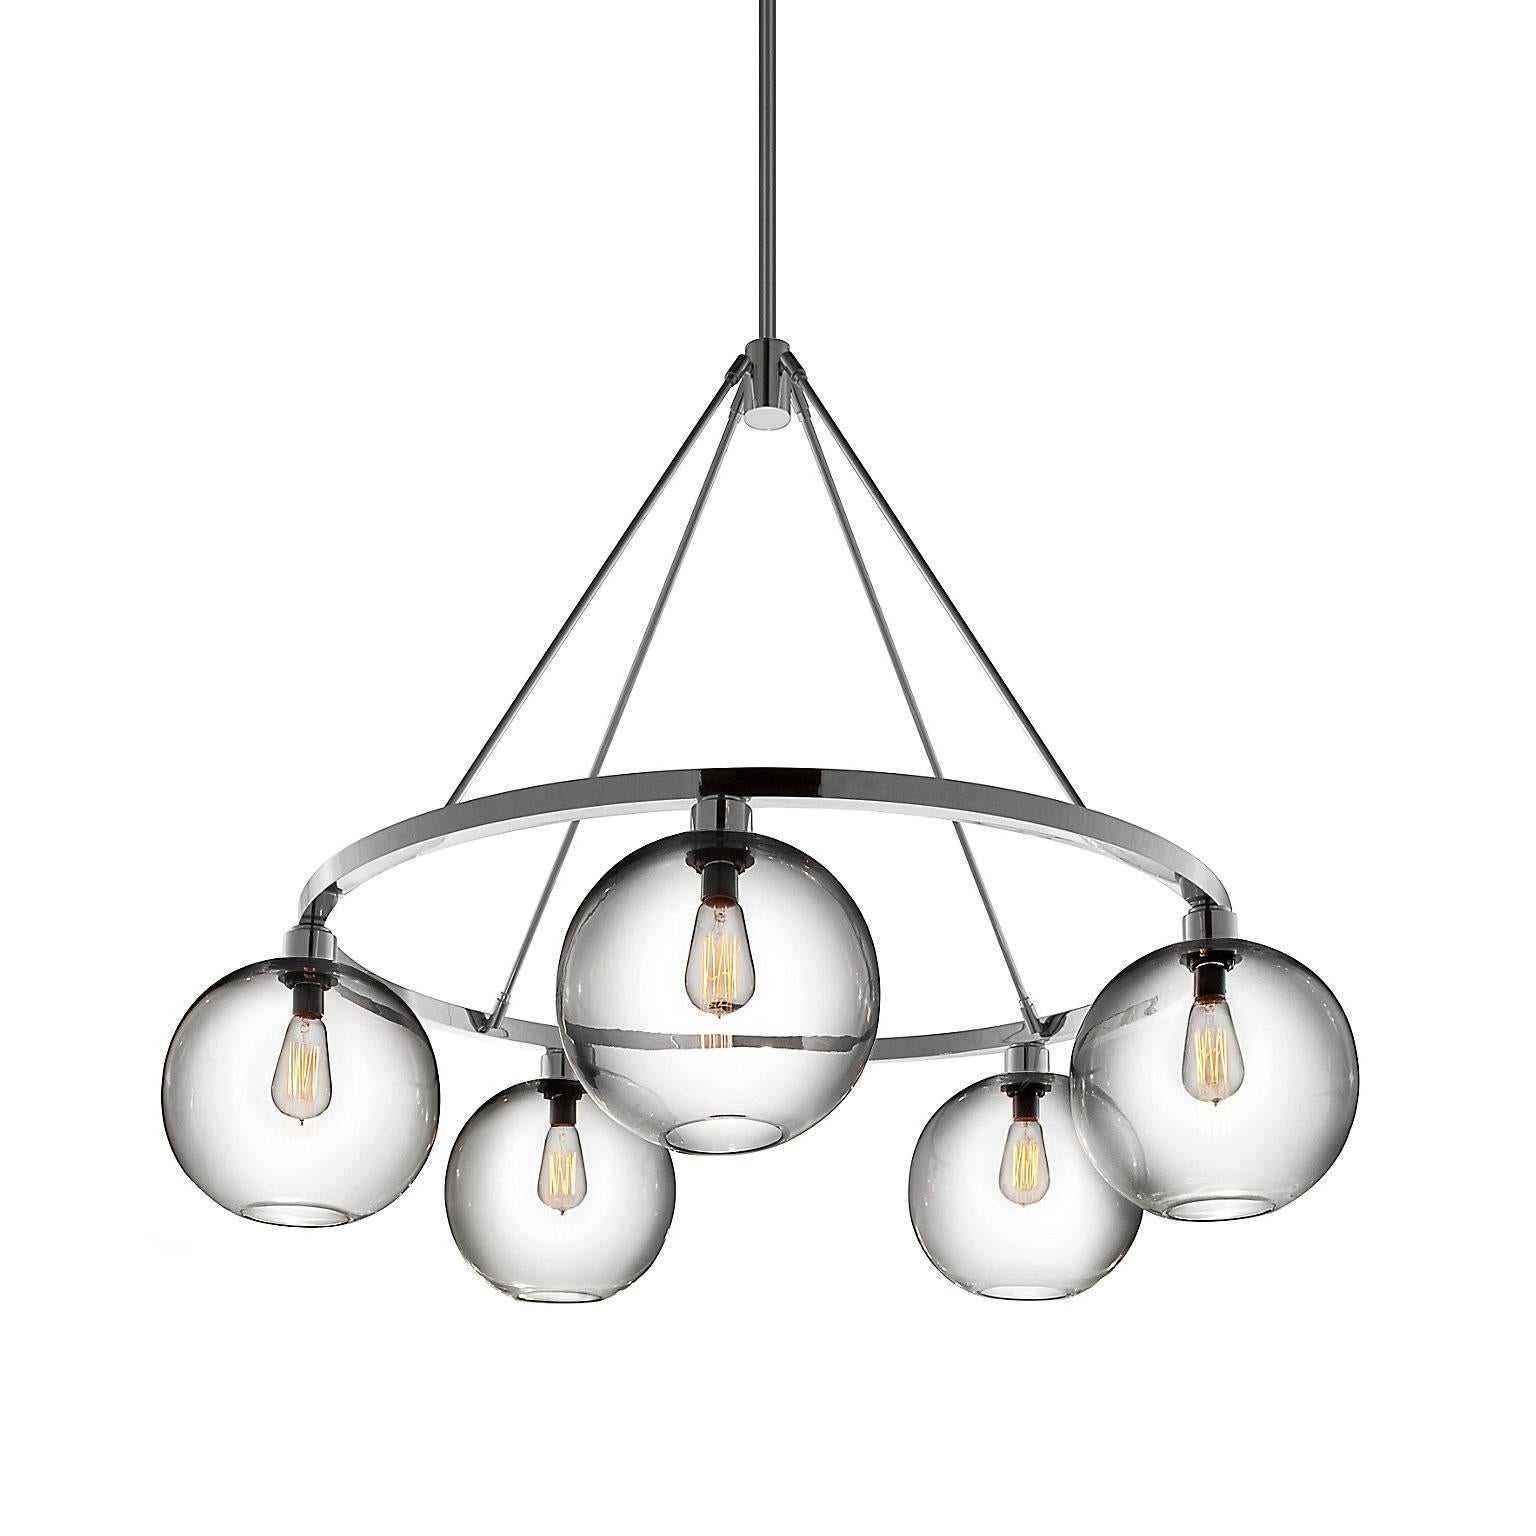 Imbued with timeless style, the striking solitaire chandelier showcases sophisticated metal finishes, a Classic, handcrafted silhouette, and the soft glow of the Edison bulb at its centre. Every single glass light that comes from Niche is handblown